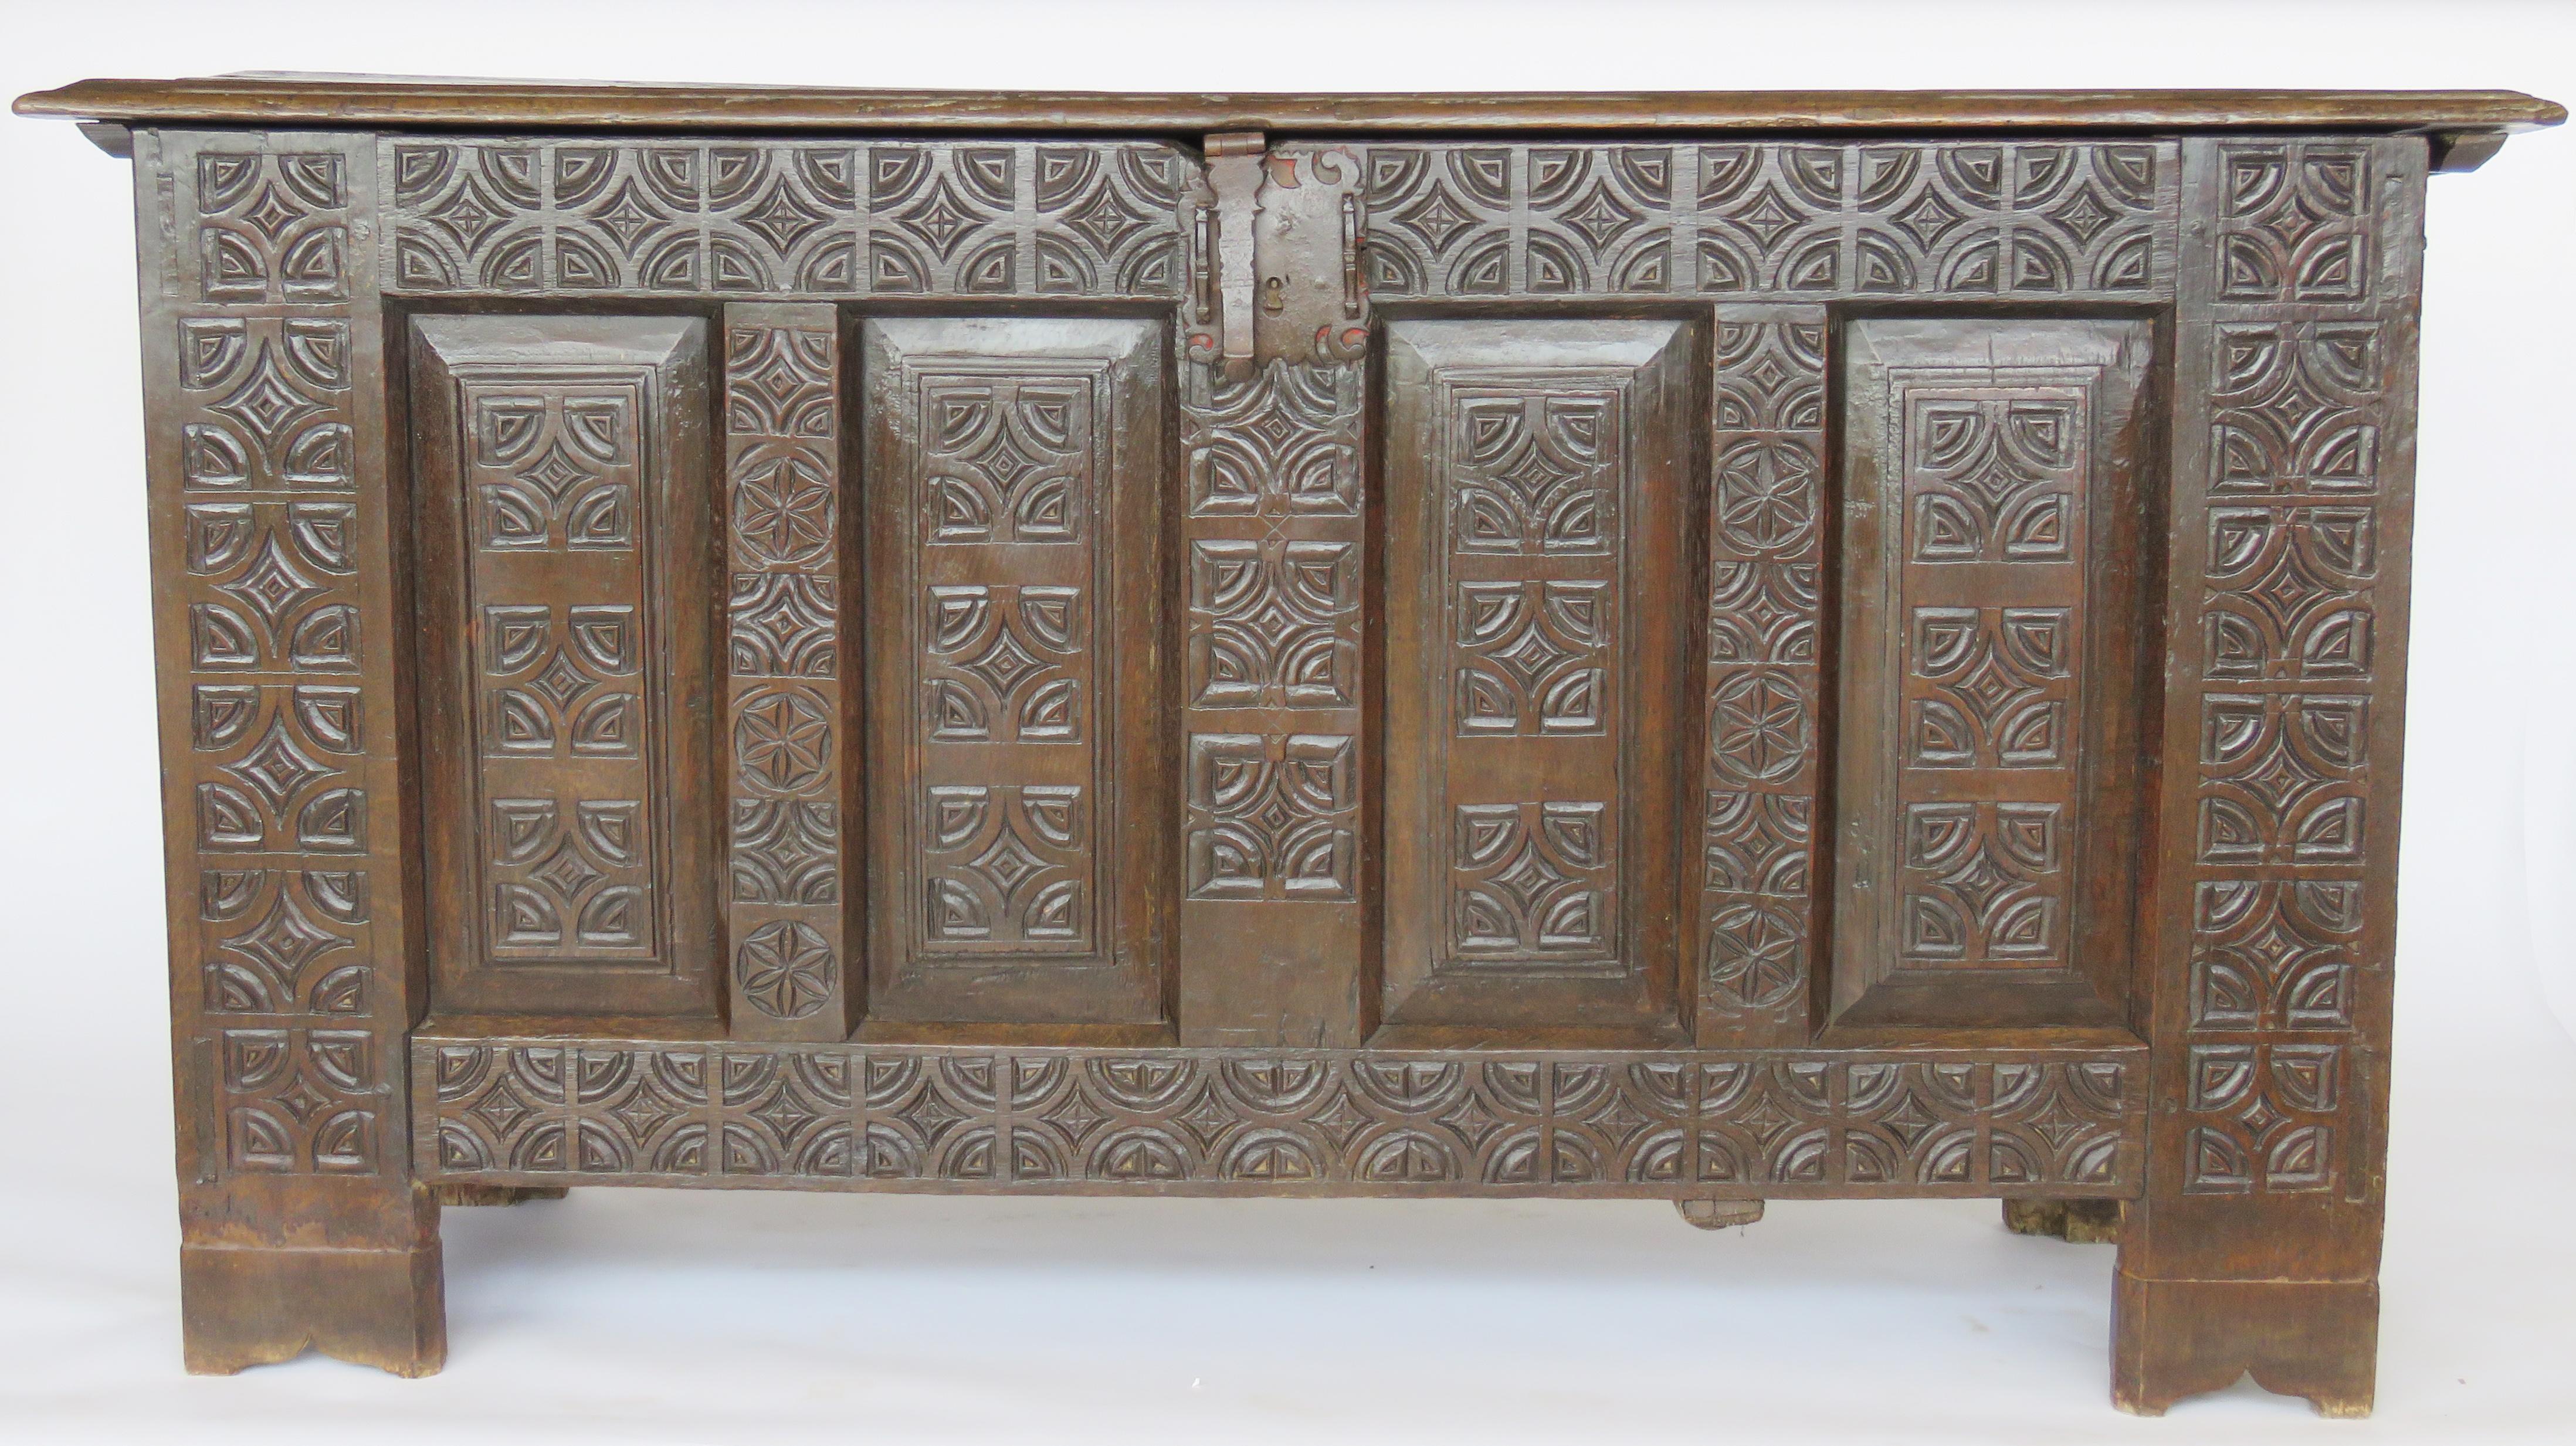 Rectangular hinged molded top over conforming case, front panel deeply carved with geometric motifs, molded panelled sides; original shield lock and hardware.